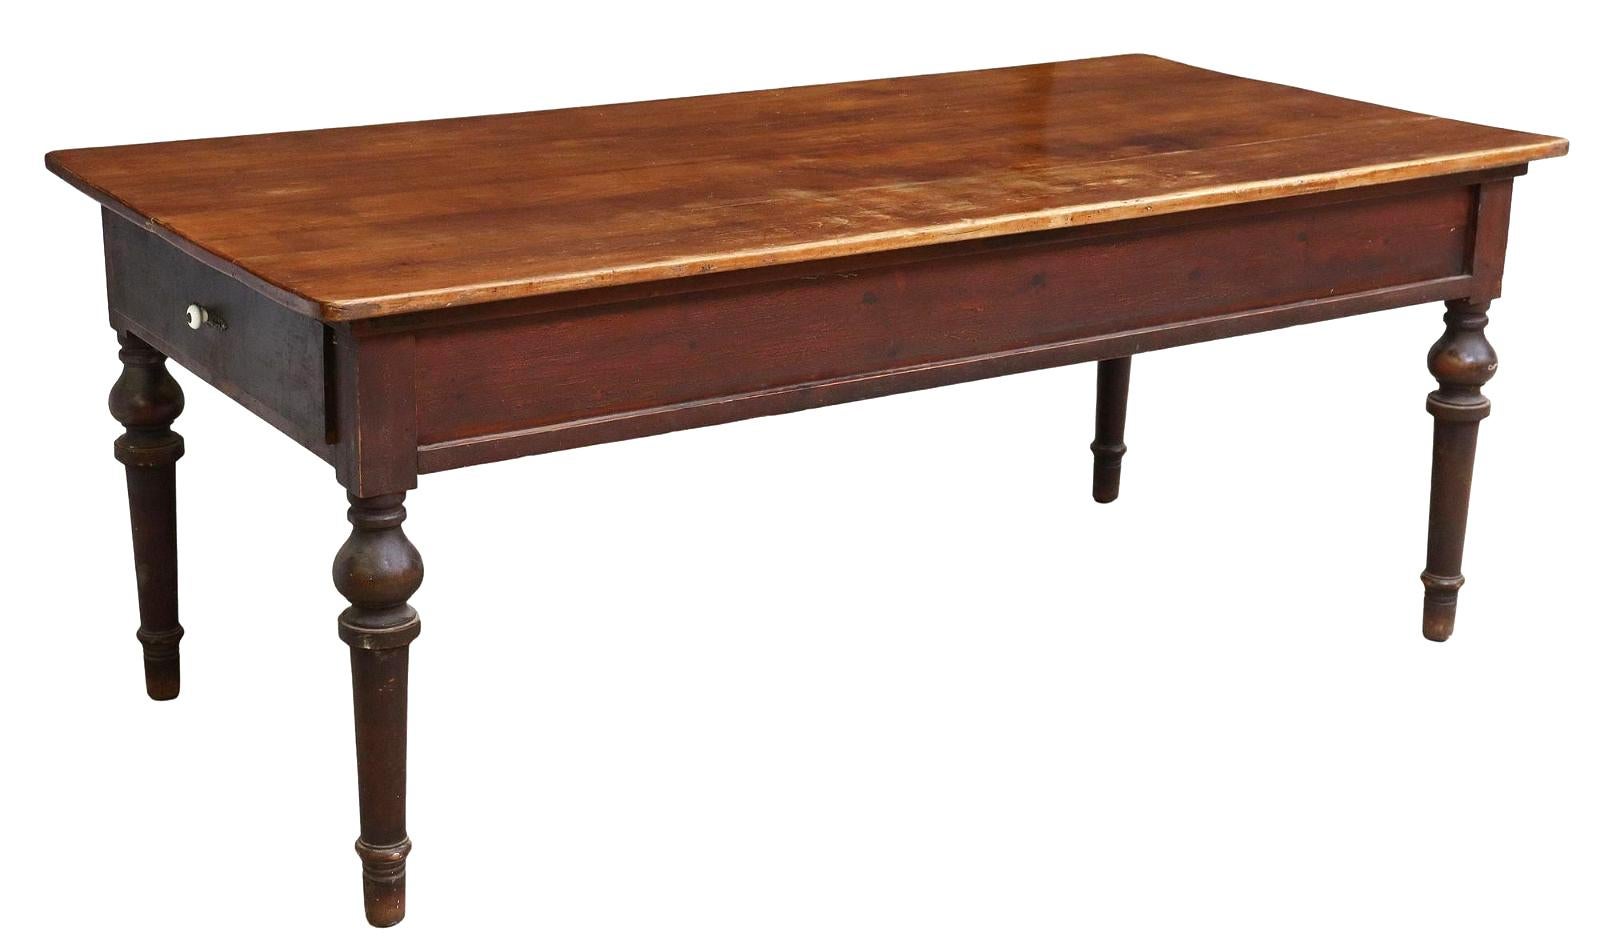 Antique Rustic farmhouse work table / dining table, Spain, 19th c.. This table features a rectangular plank top, two side drawers, rising on turned legs. Drawer features a white porcelain knob.

Dimensions
approx 31 7/8